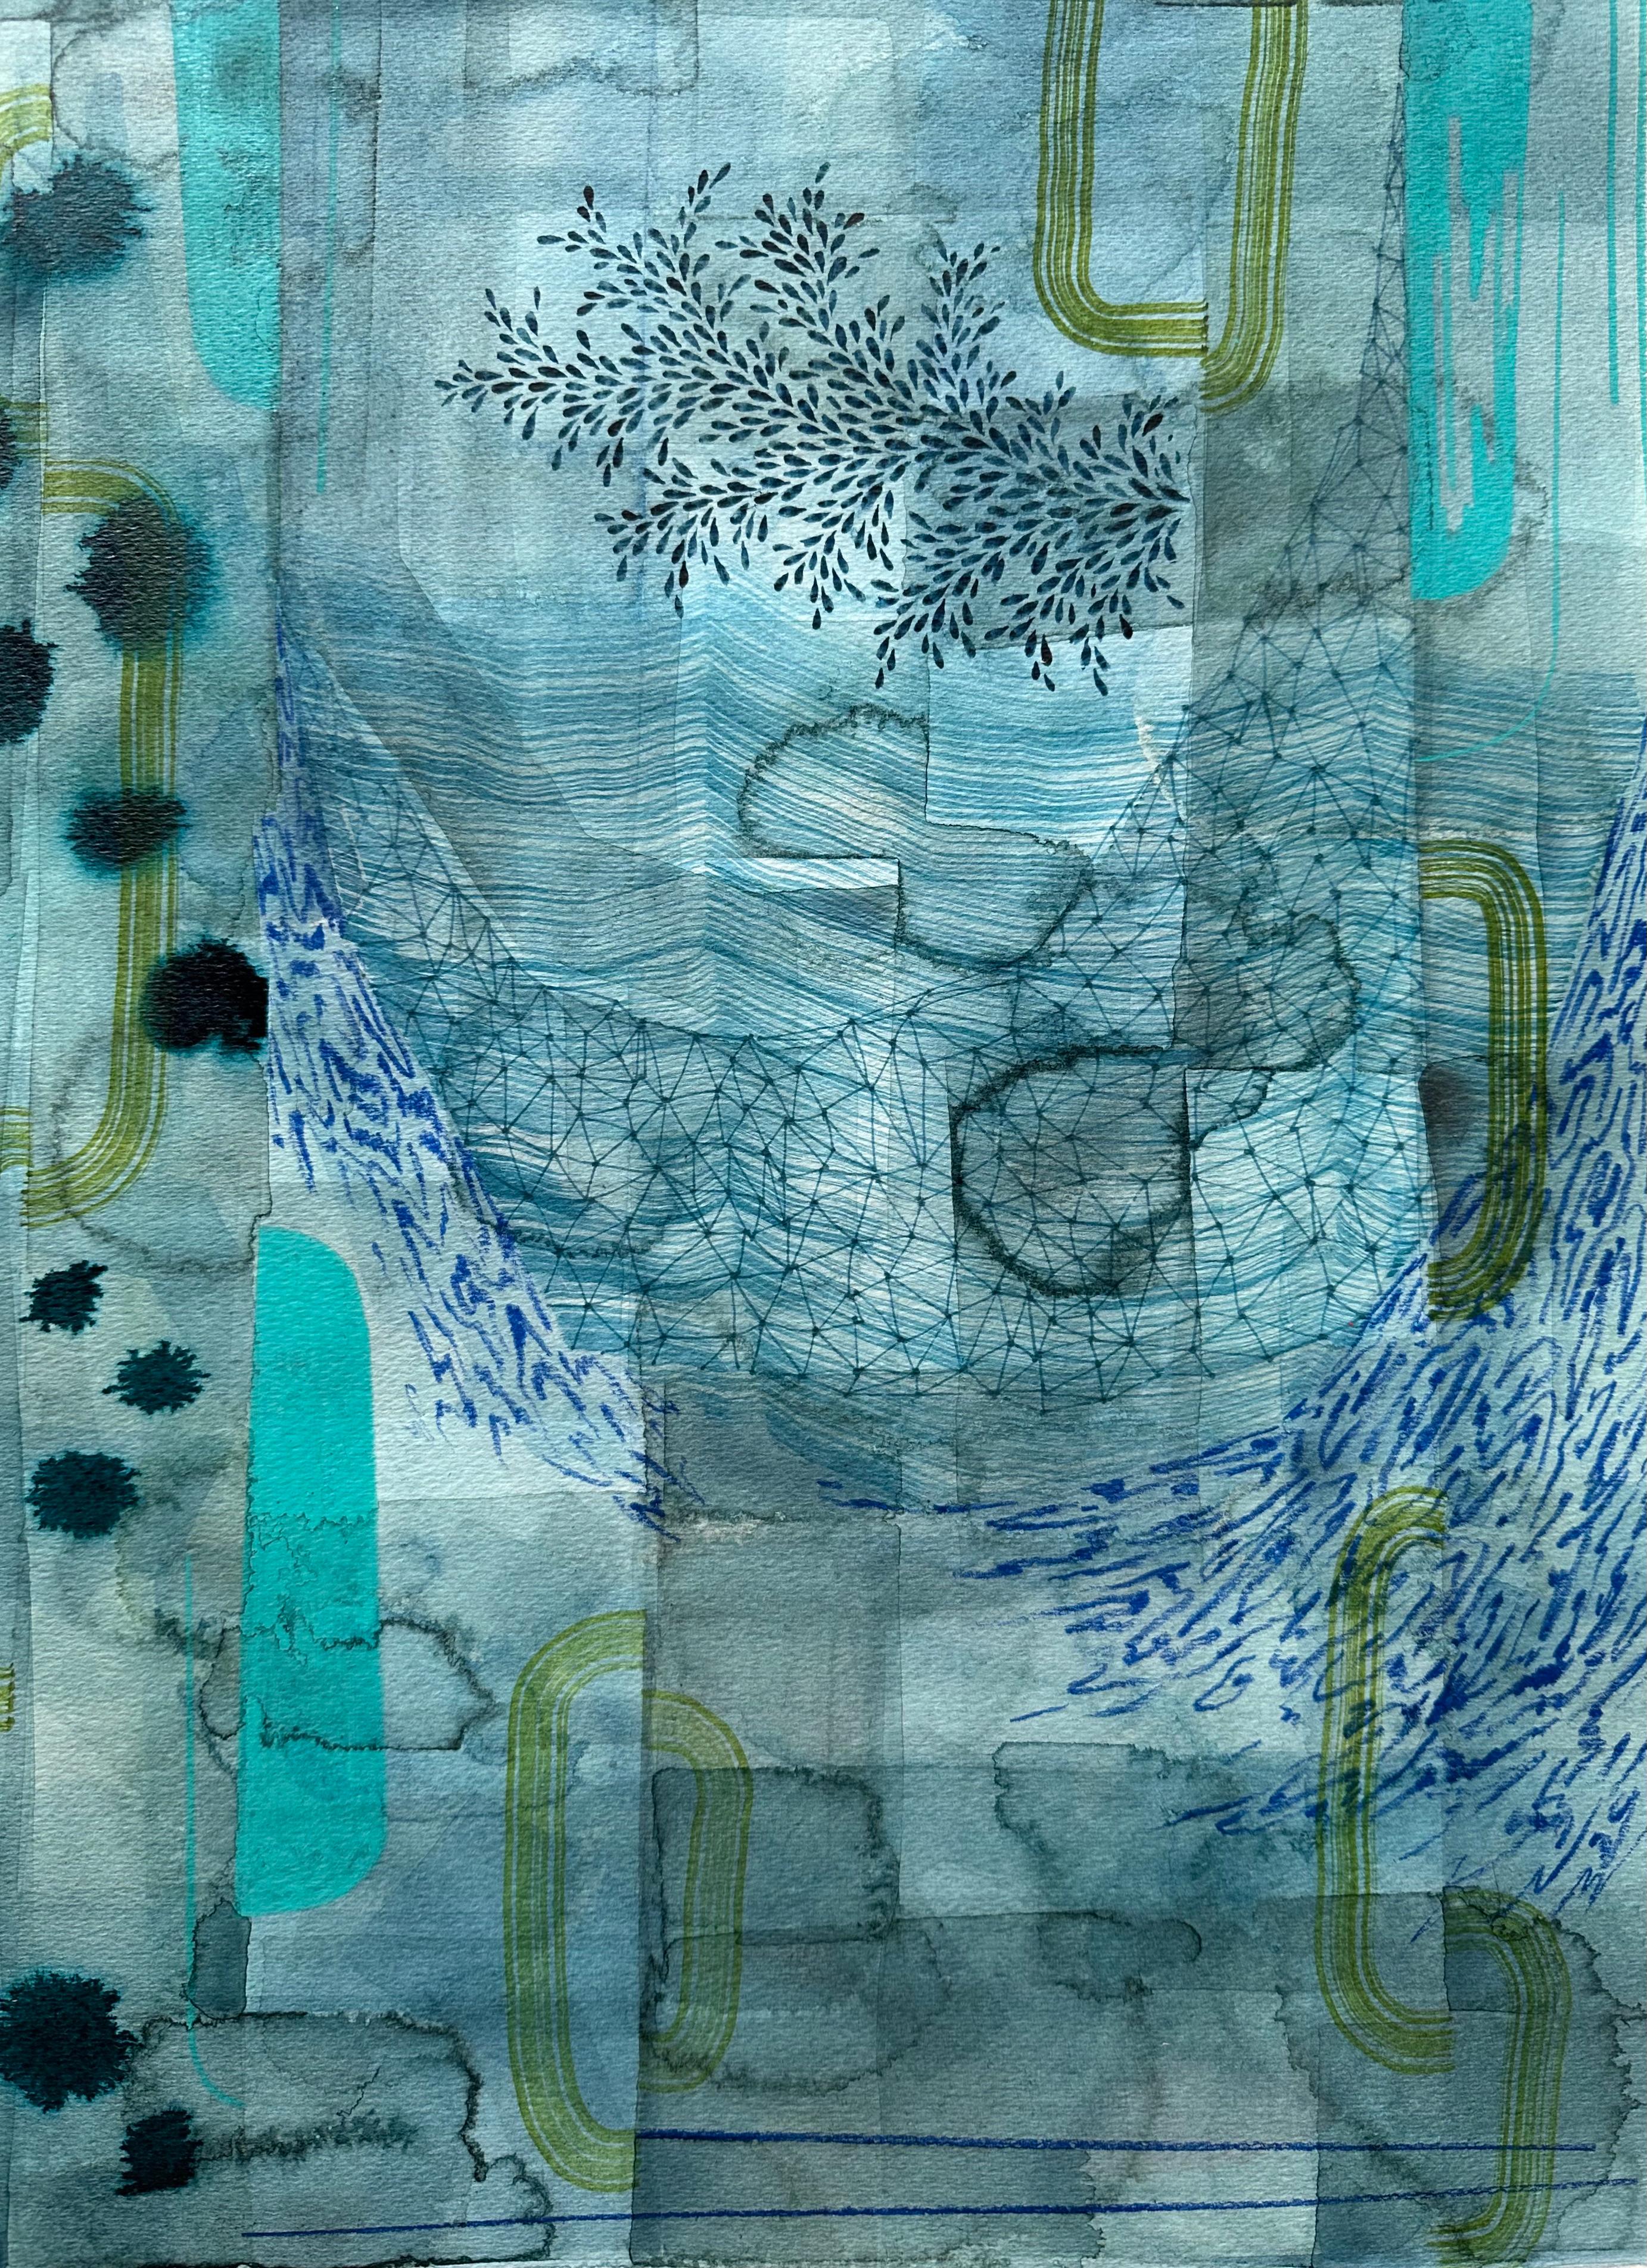 Untitled 600, Teal Blue, Olive Green, Indigo Patterns, Abstract Landscape - Contemporary Art by Gabe Brown